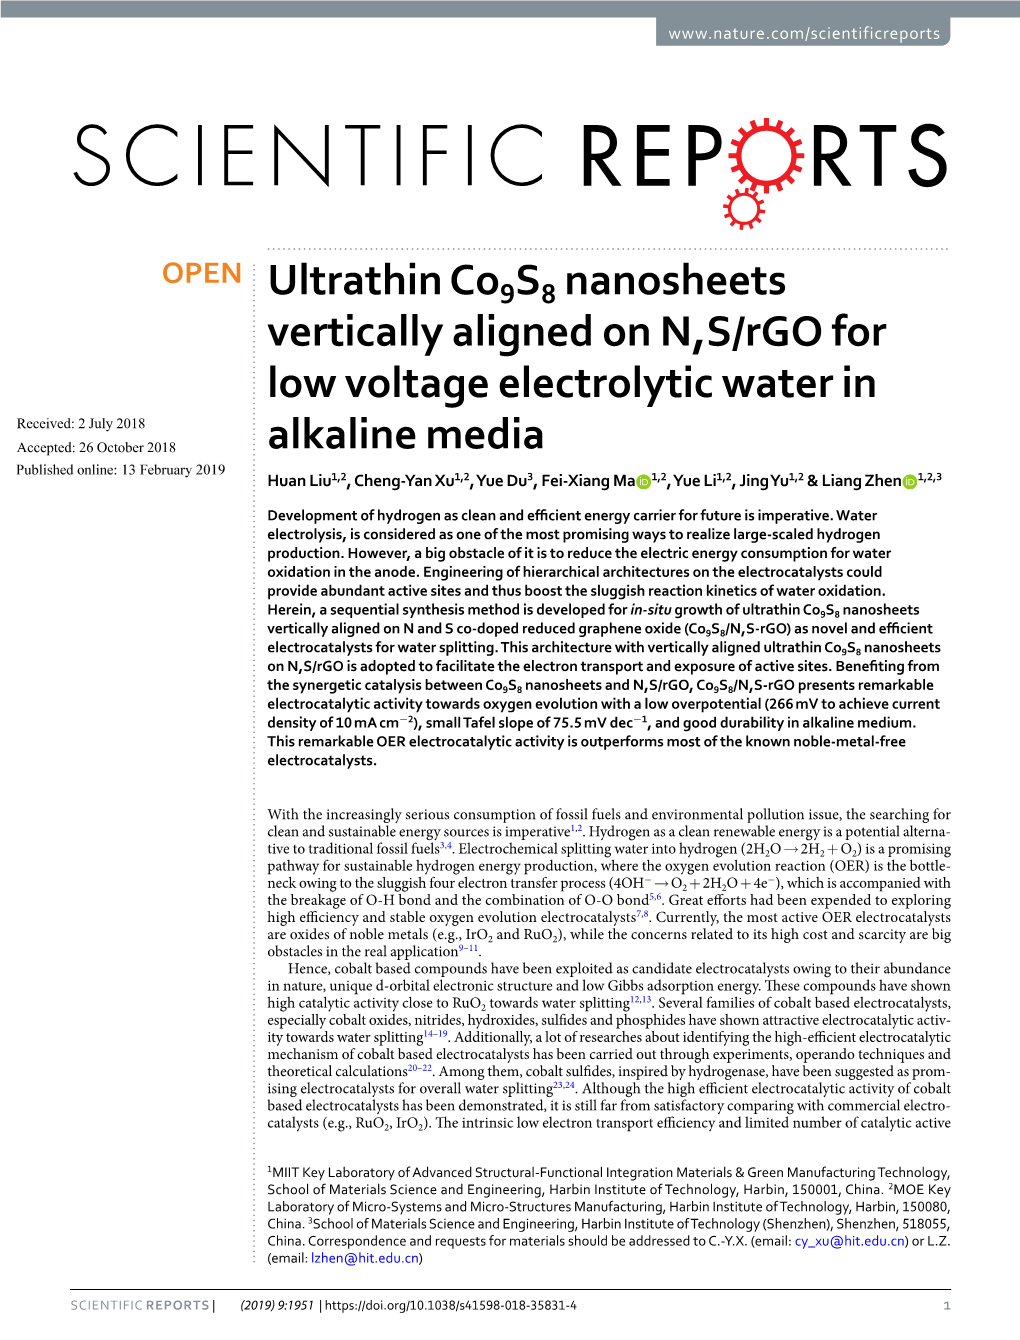 Ultrathin Co9s8 Nanosheets Vertically Aligned on N,S/Rgo for Low Voltage